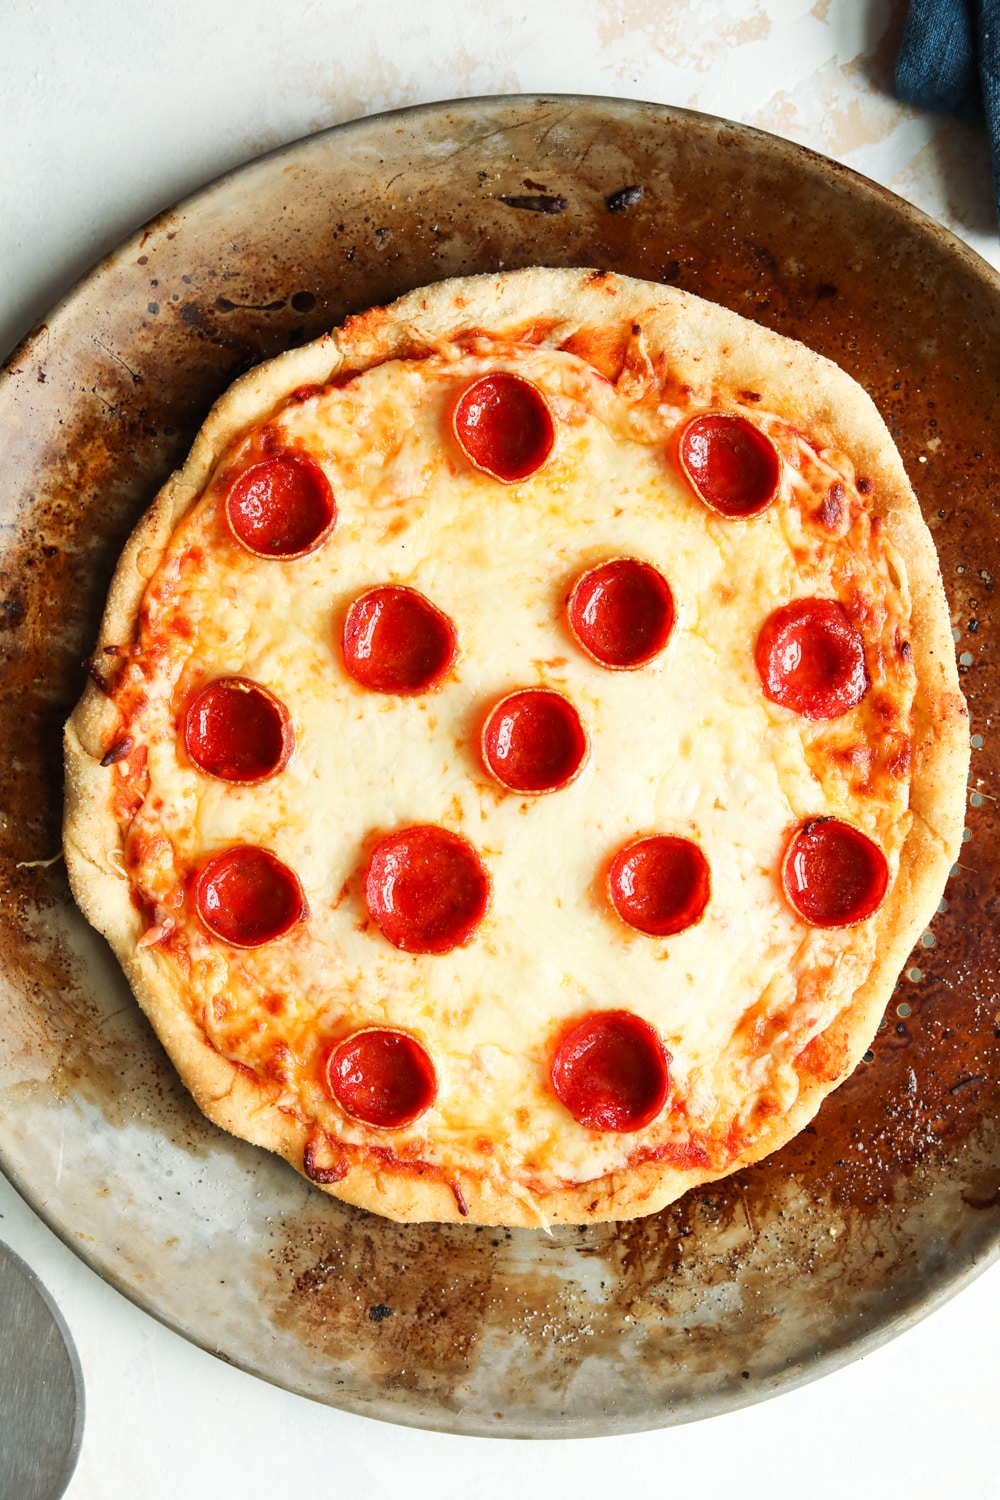 A cheese and pepperoni pizza set on a non-stick pizza tray.